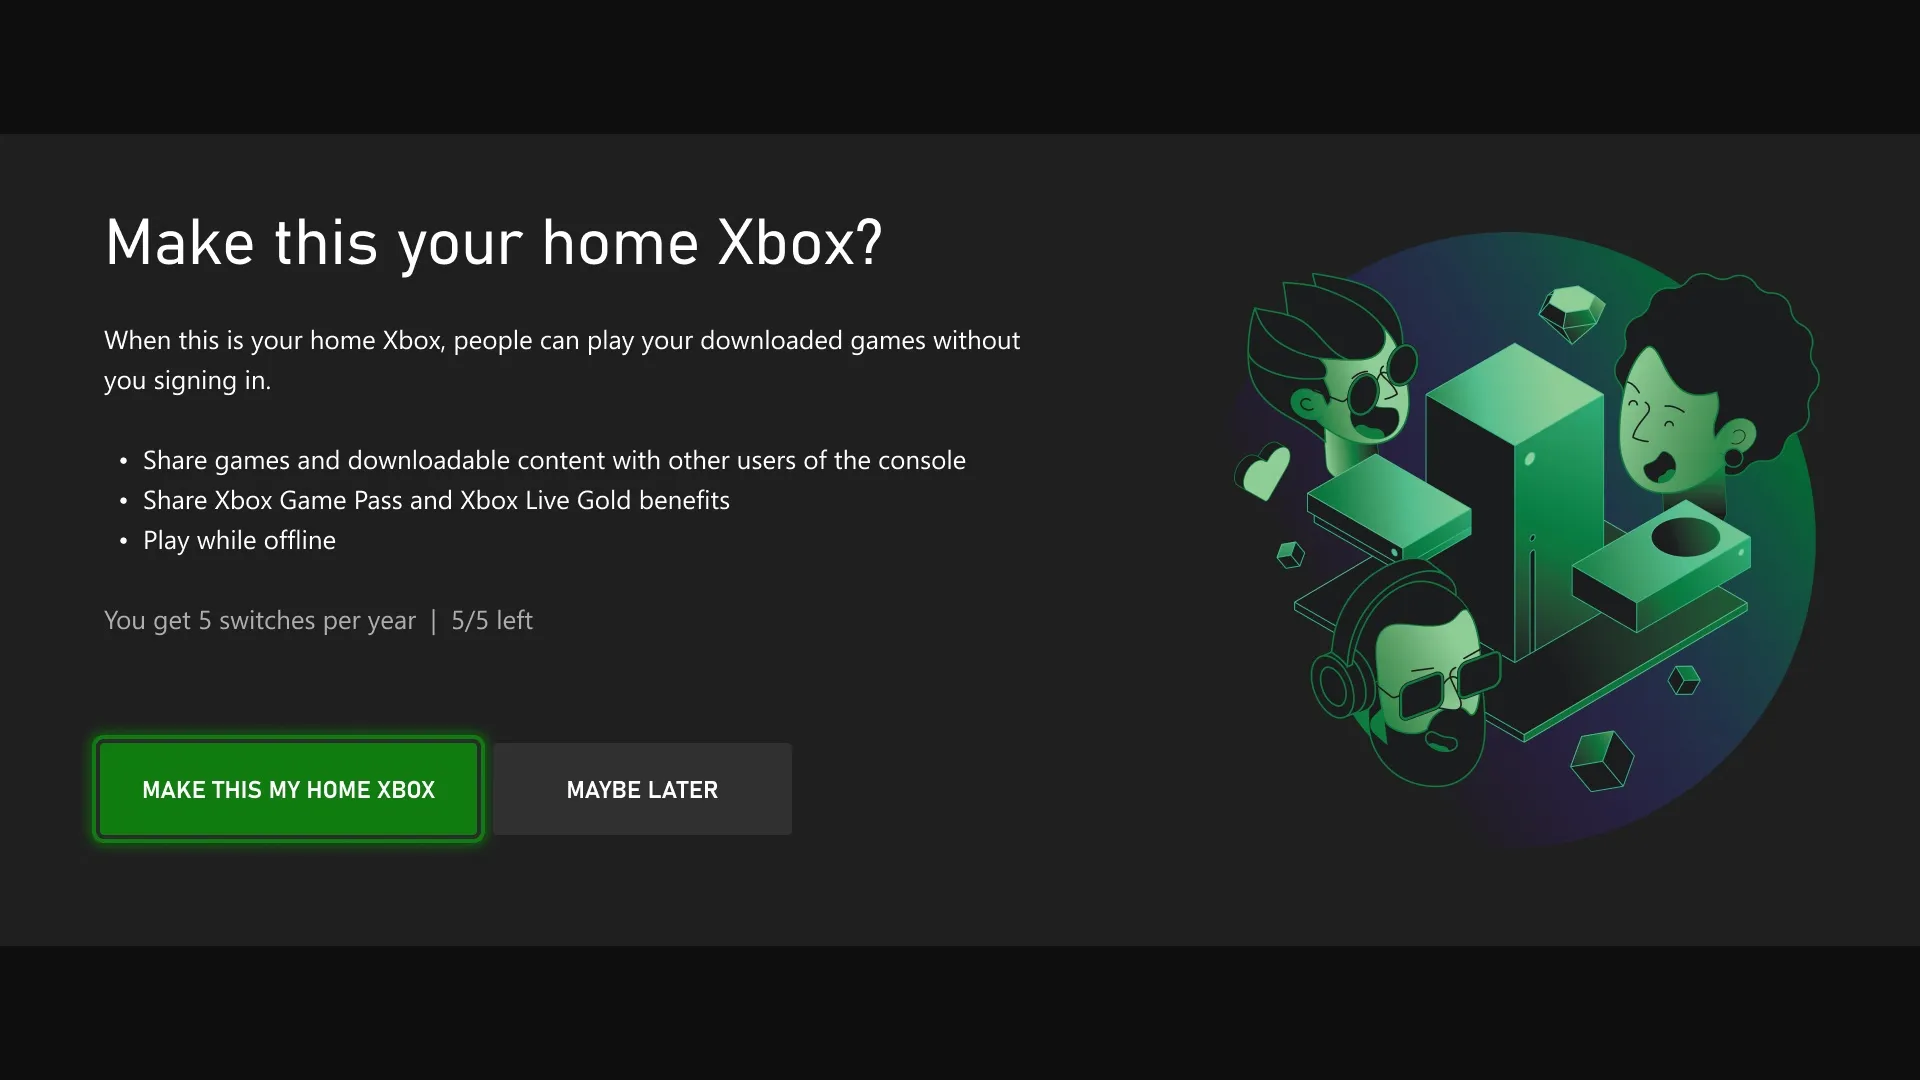 Xbox October Update: new setup screens for selecting home Xbox